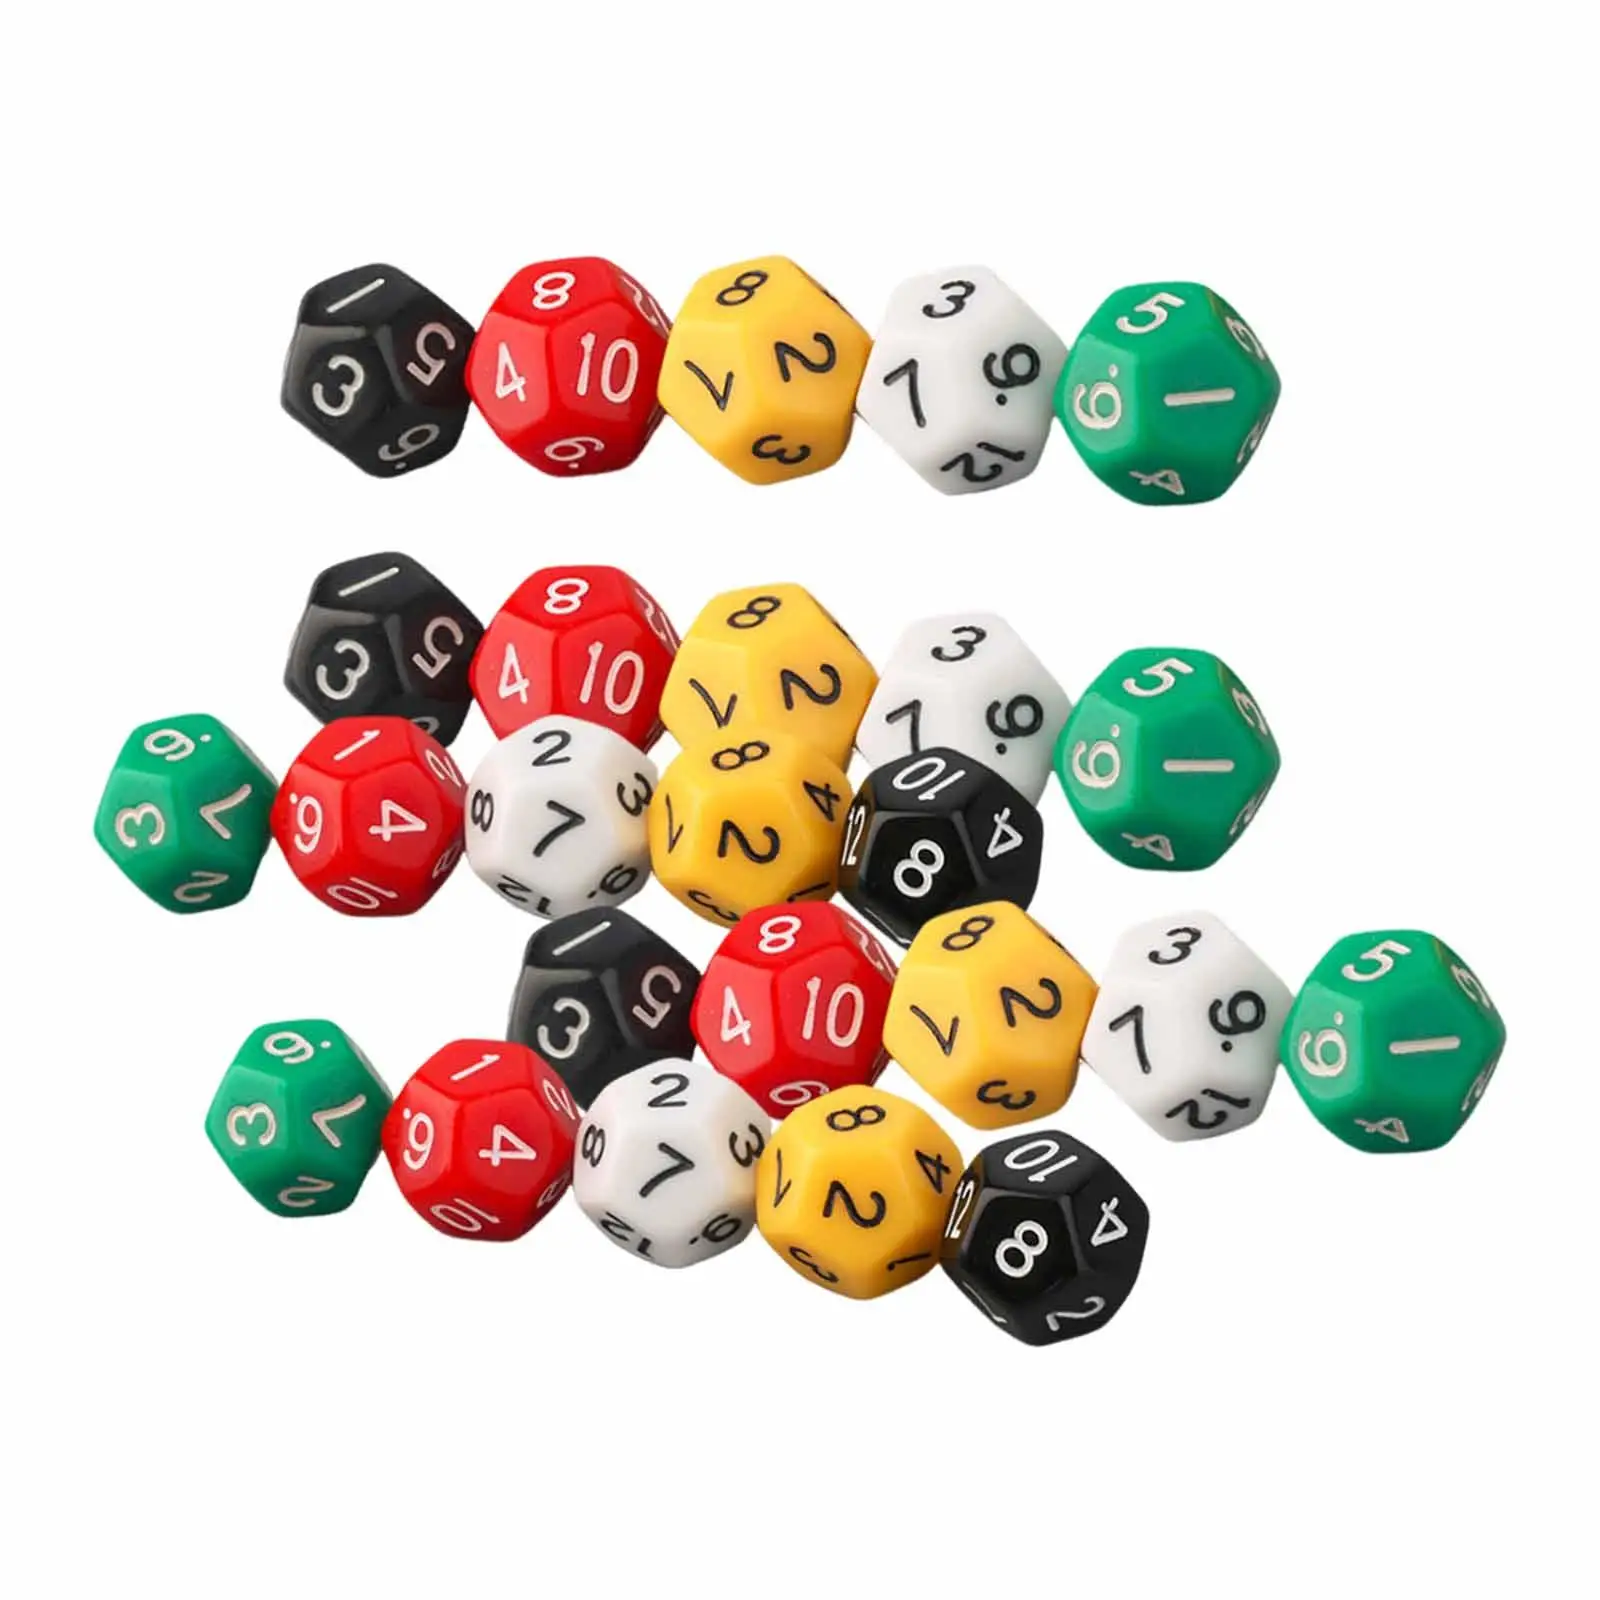 25Pcs Polyhedral Dice Gift Handmade Vintage Style Parties Toy Crafts Table Gaming Dice D12 Multisided Dice for Role Playing Game